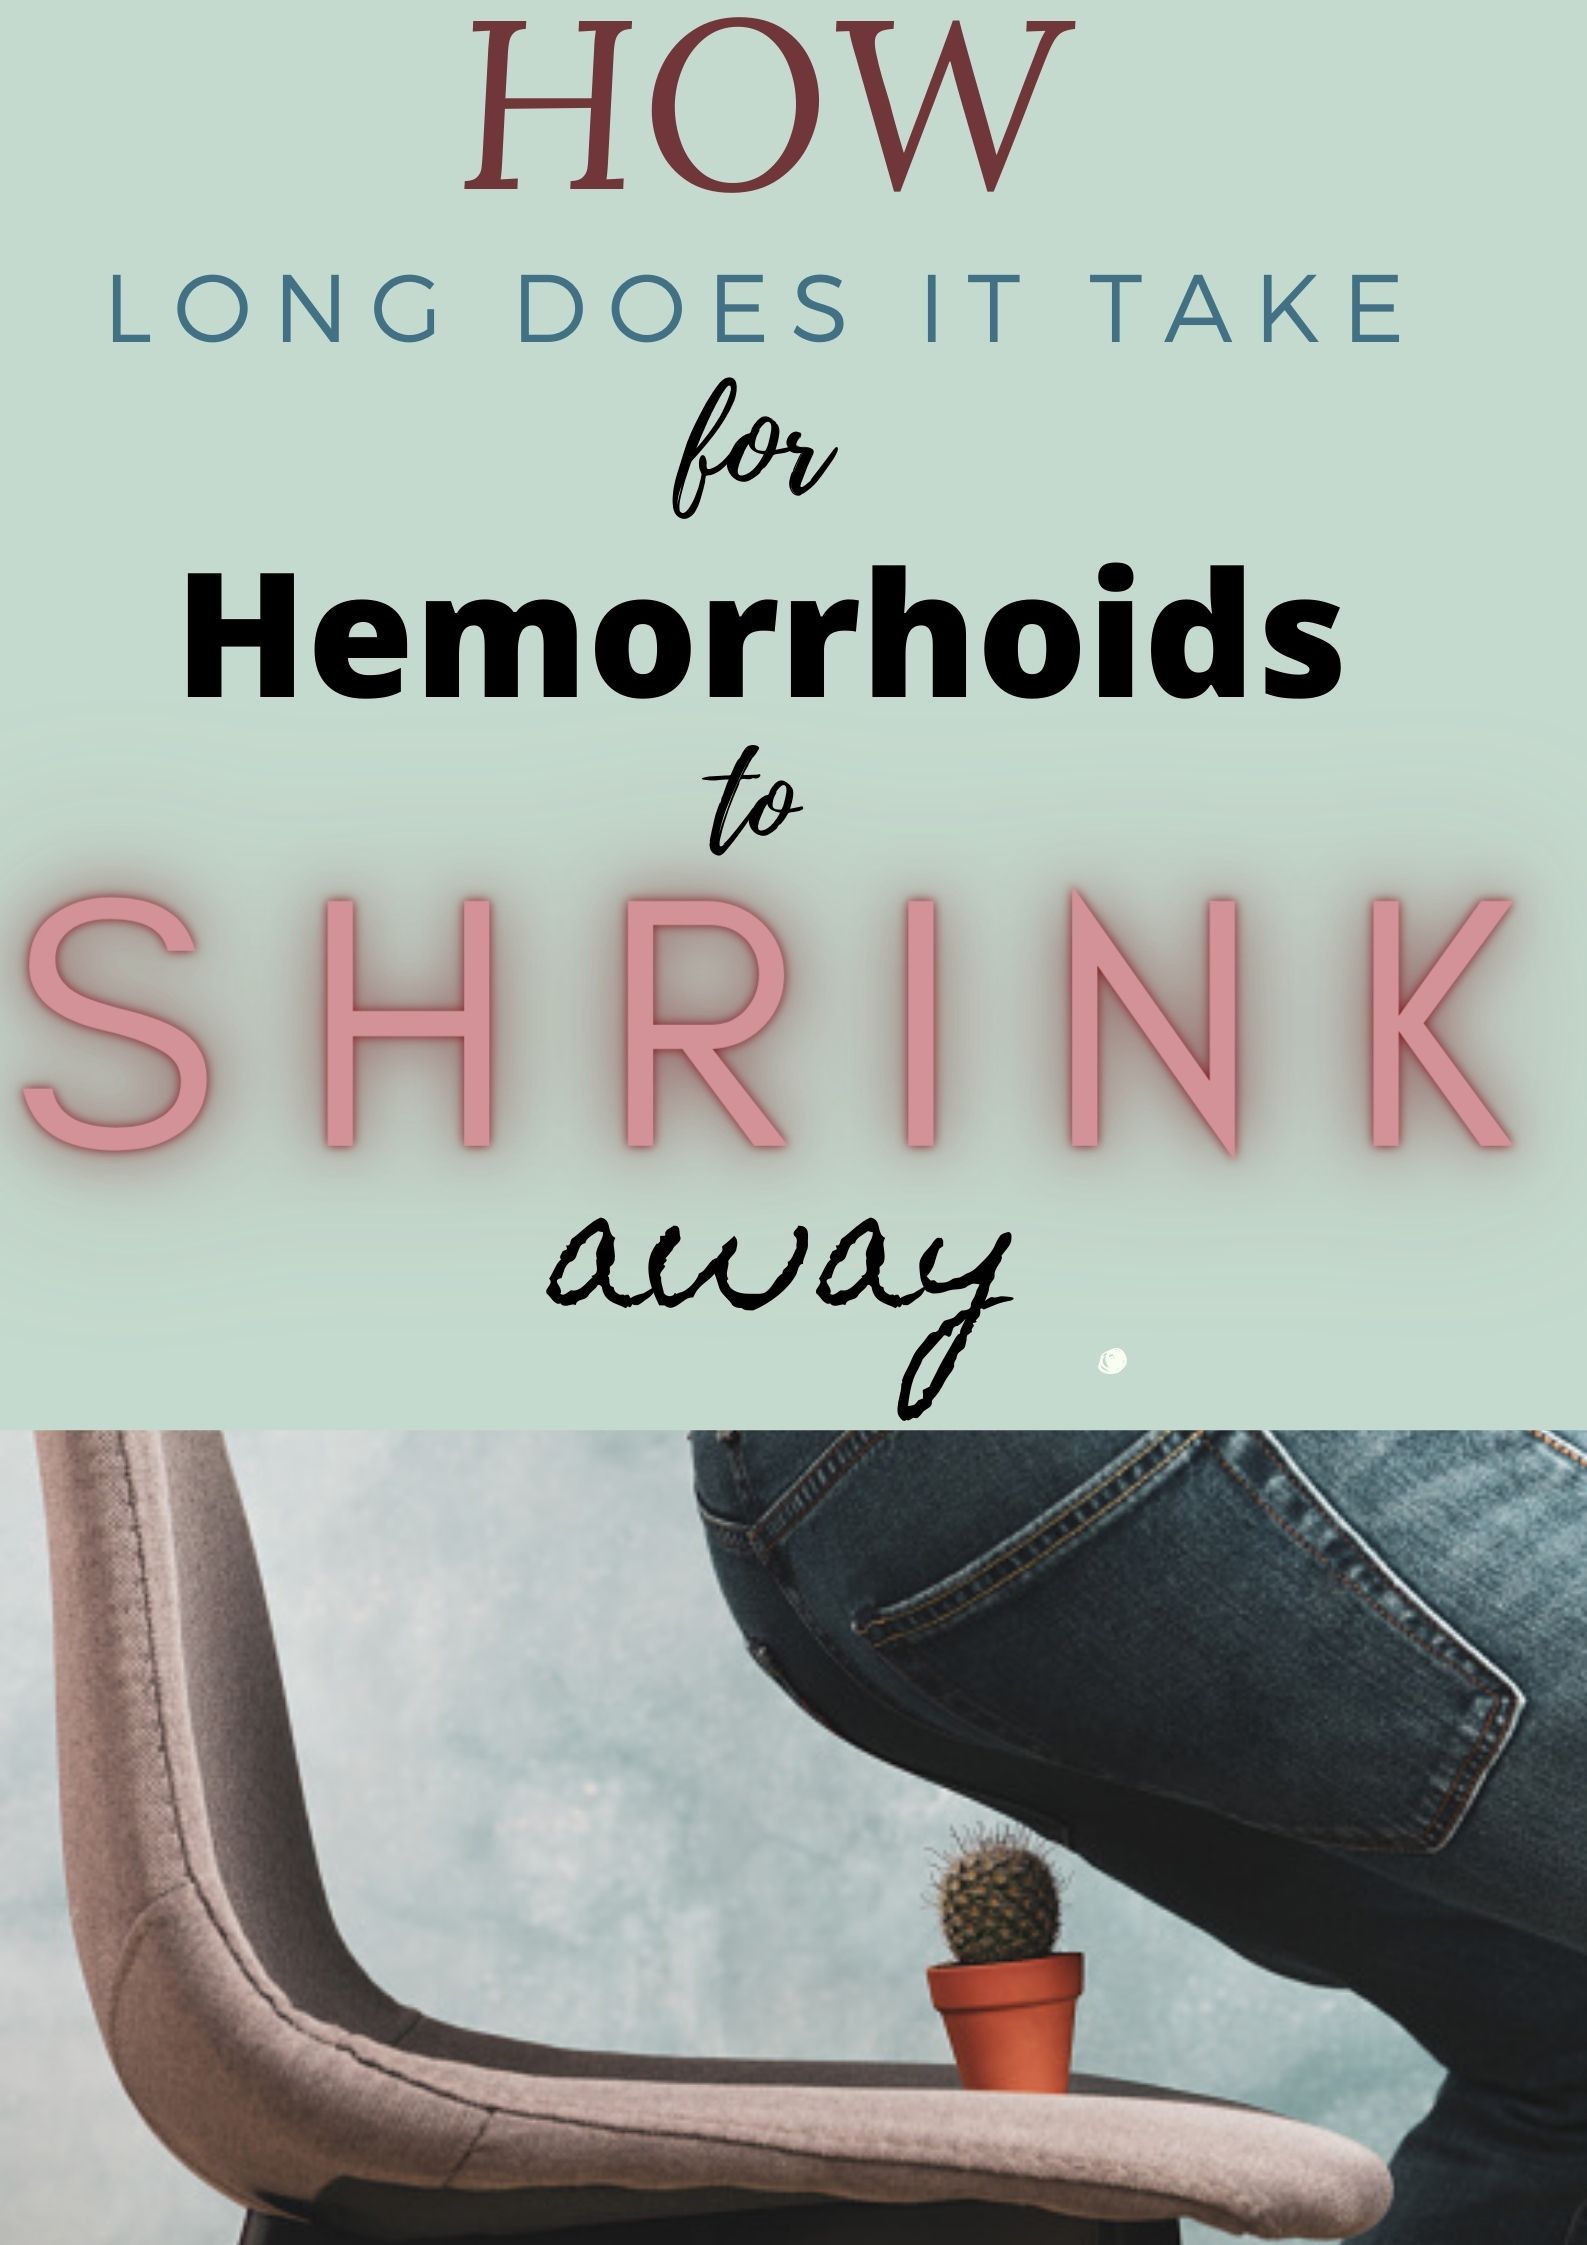 how long does it take for hemorrhoids to shrink away